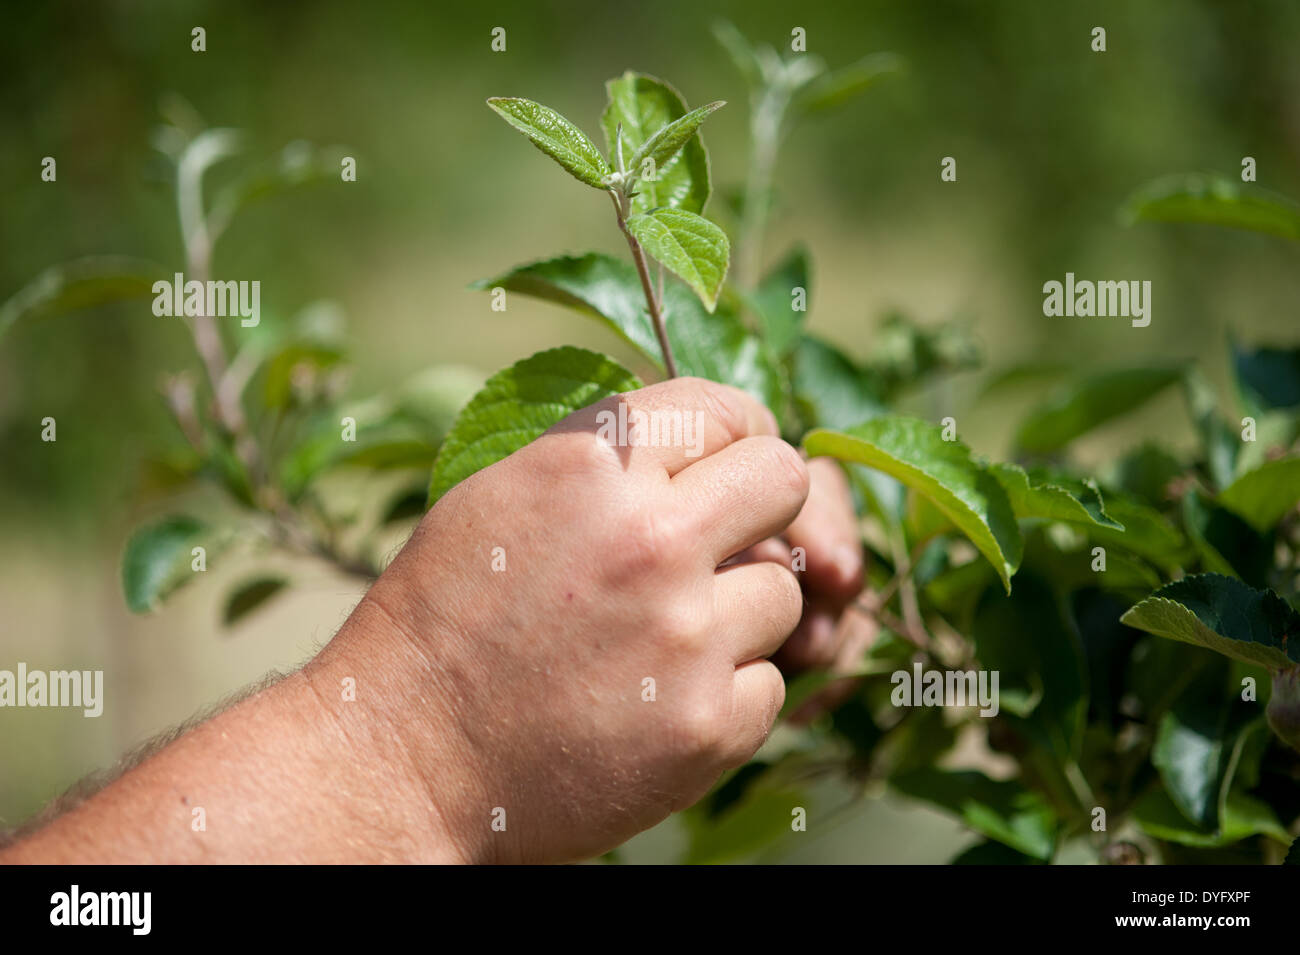 Hands Holding Fruit Tree Branch Stock Photo